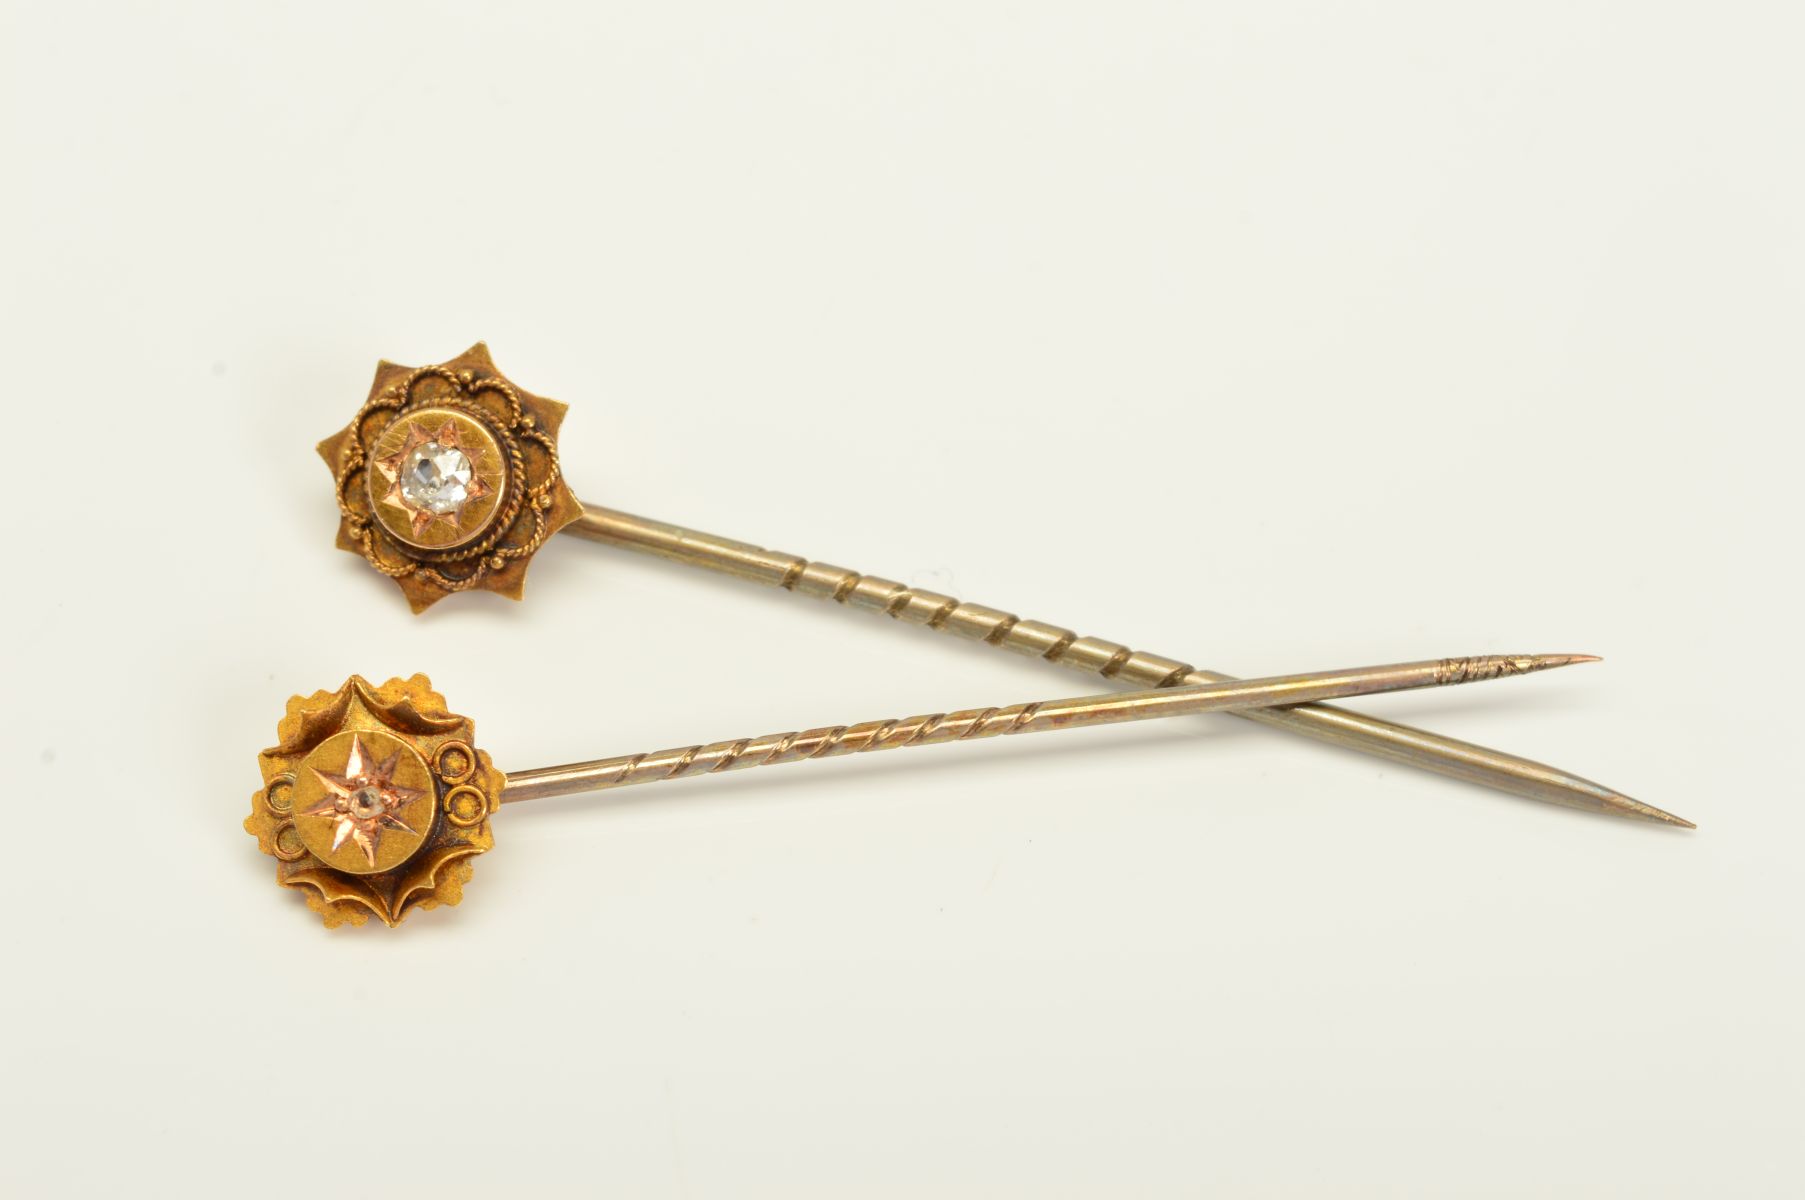 TWO LATE VICTORIAN 15CT GOLD DIAMOND STICKPINS, the first designed as an old European cut diamond in